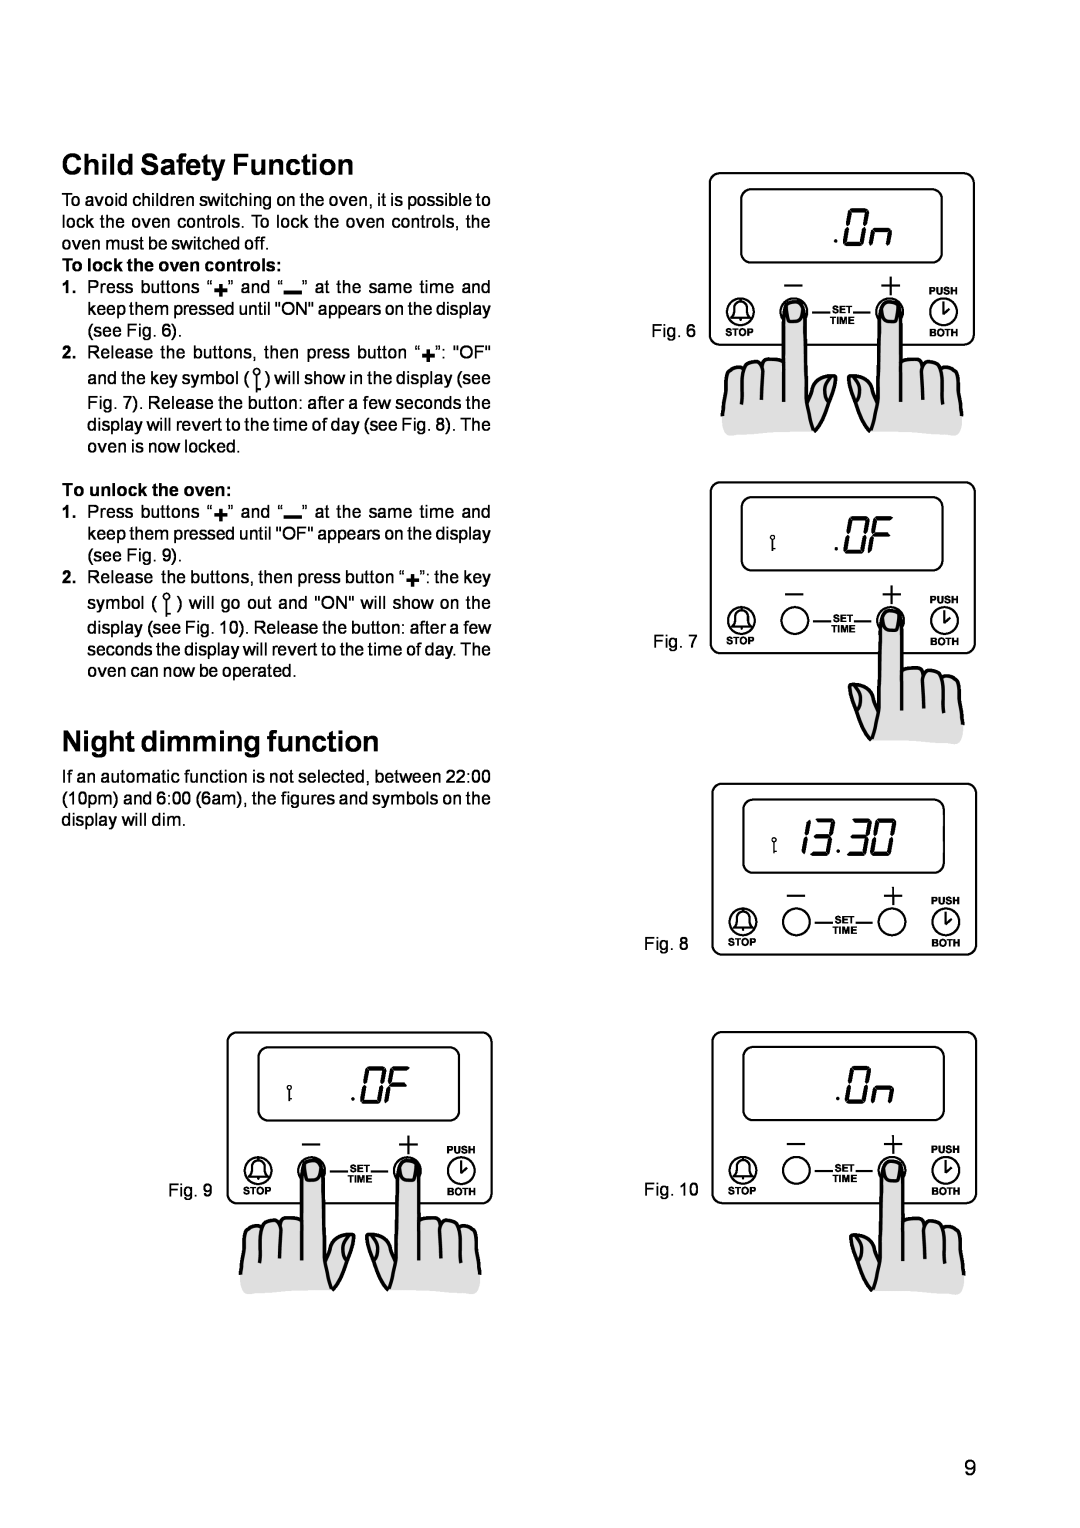 Zanussi ZCM 611 manual Child Safety Function, Night dimming function 